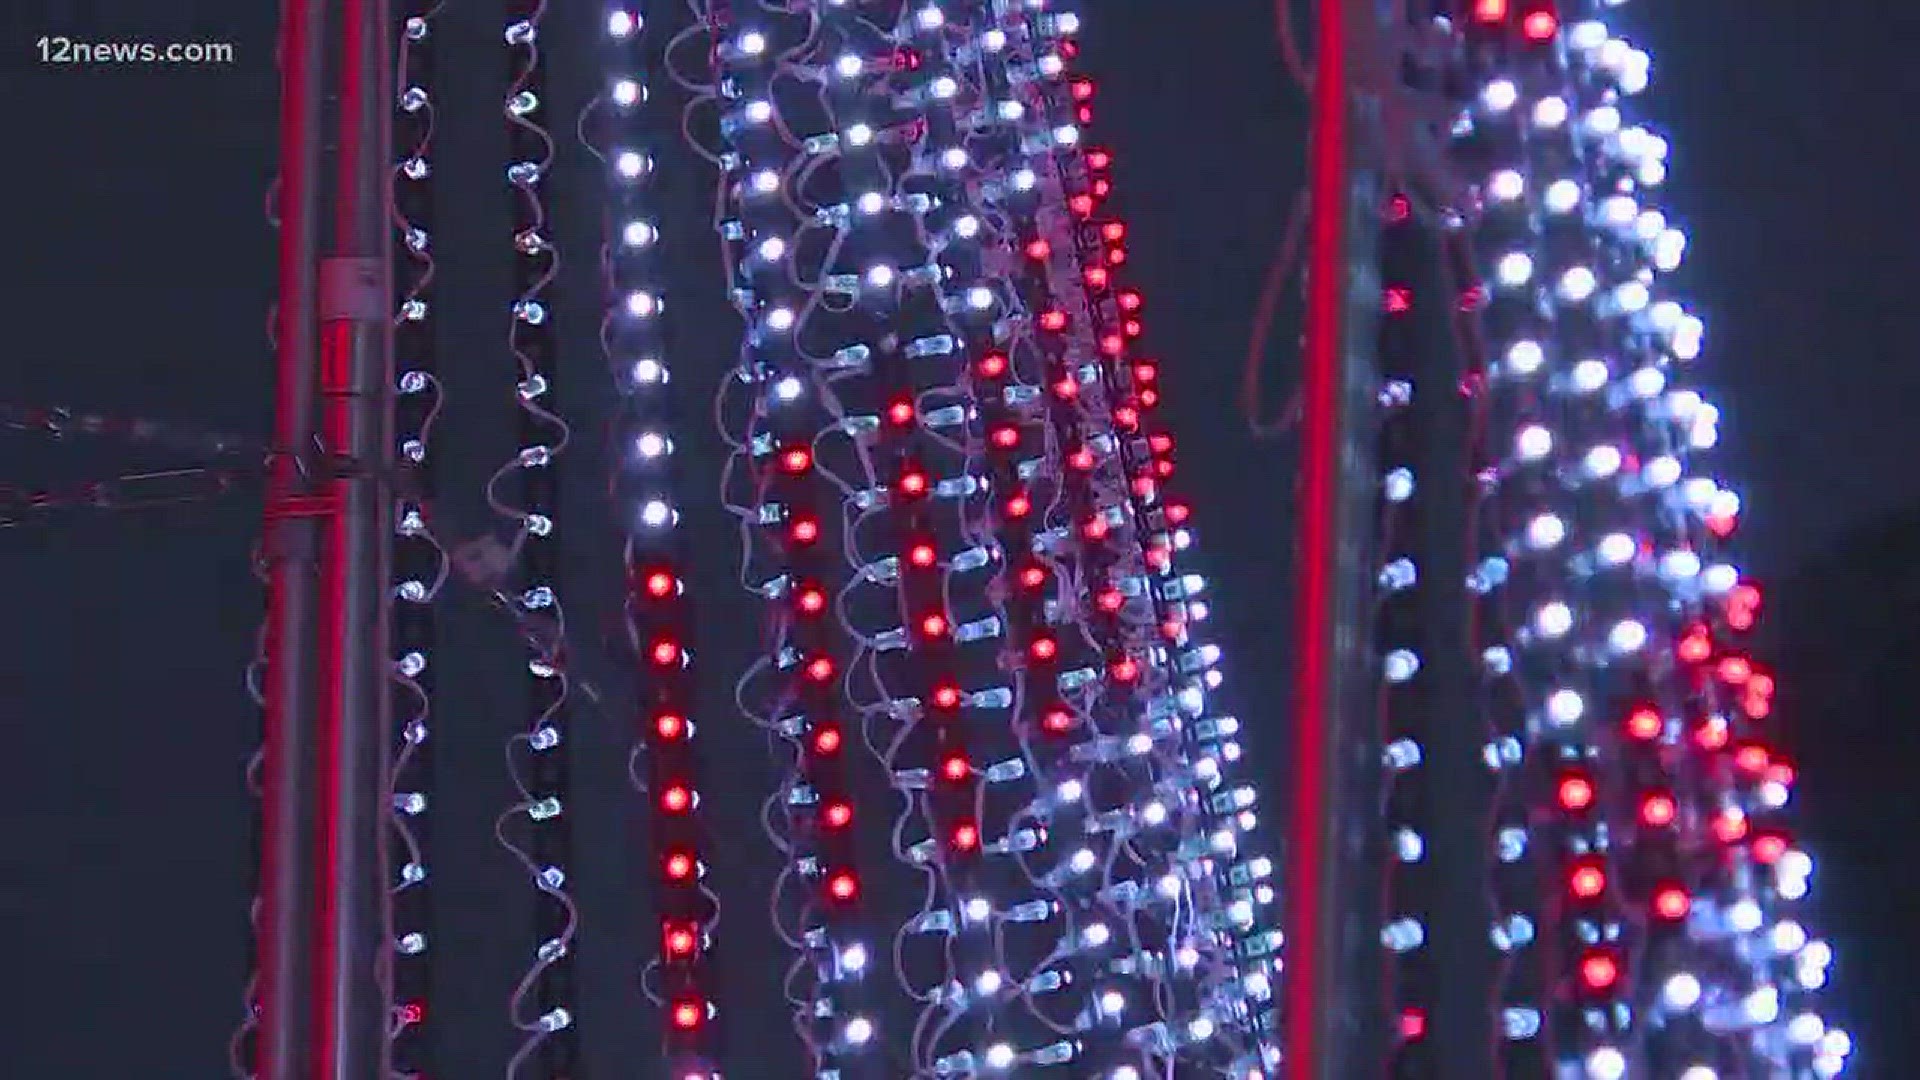 One Flagstaff family shows its devotion to the holiday season with more than 40,000 lights.